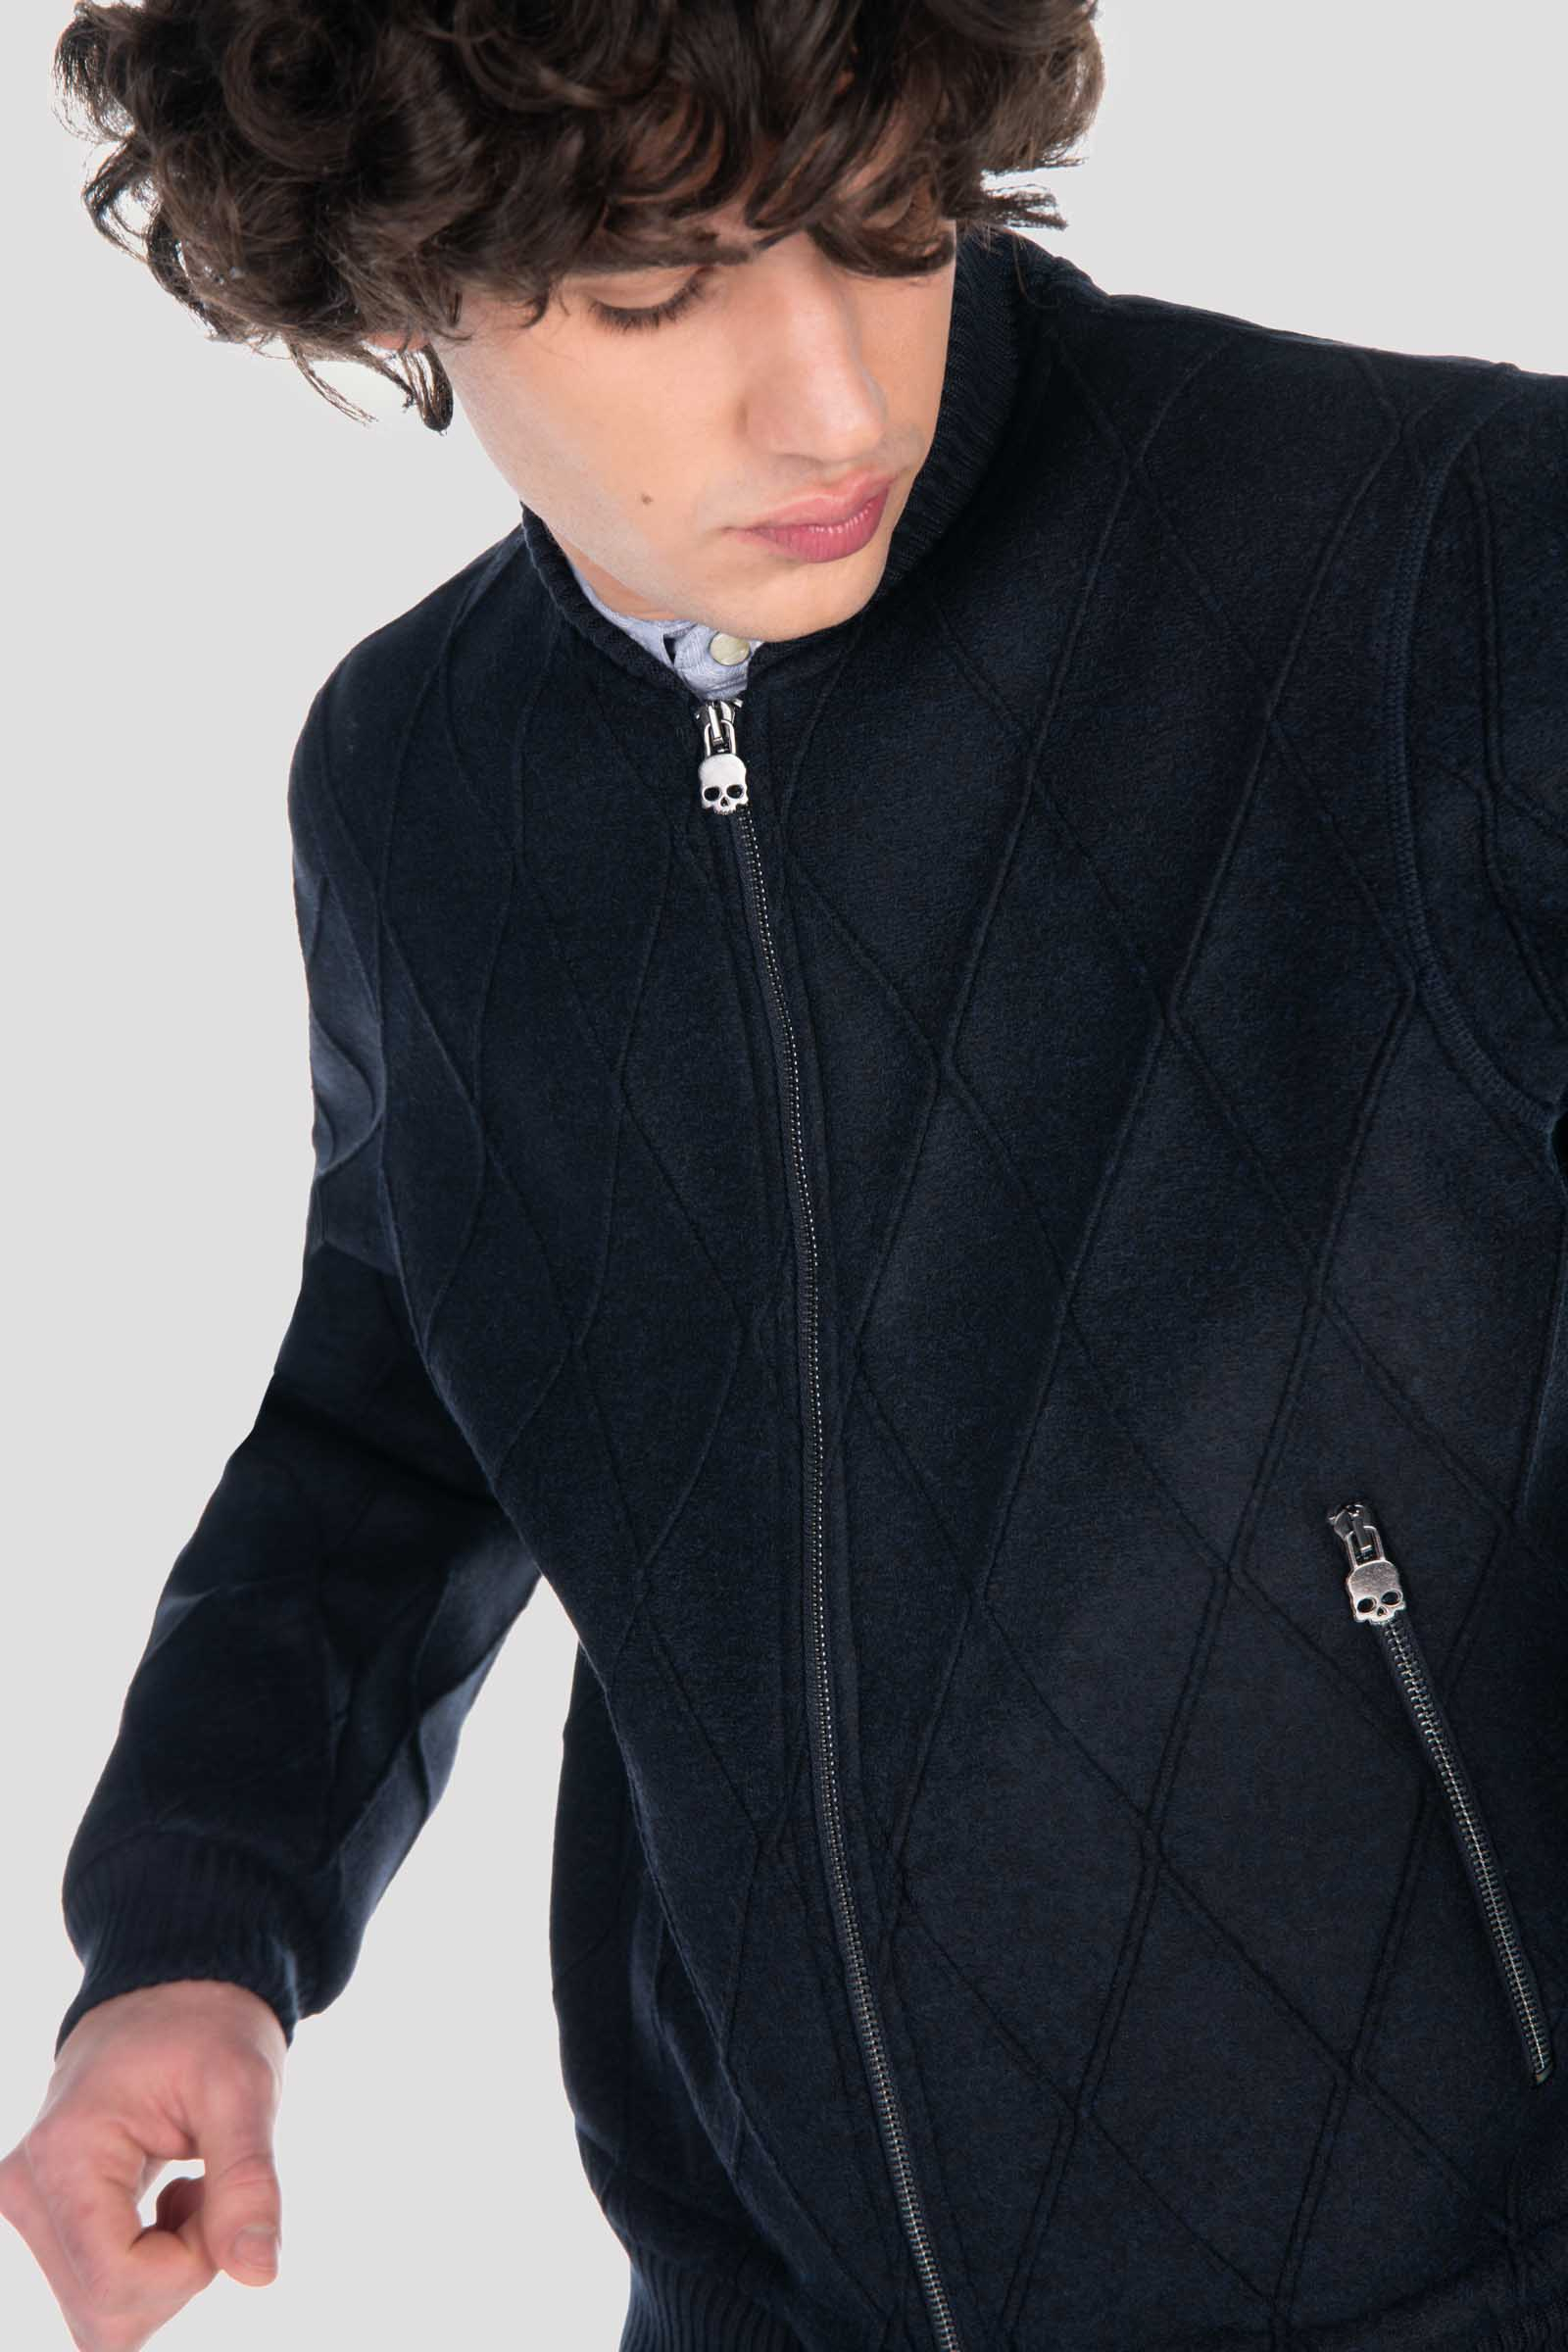 QUILTED BOMBER - Outlet Hydrogen - Abbigliamento sportivo